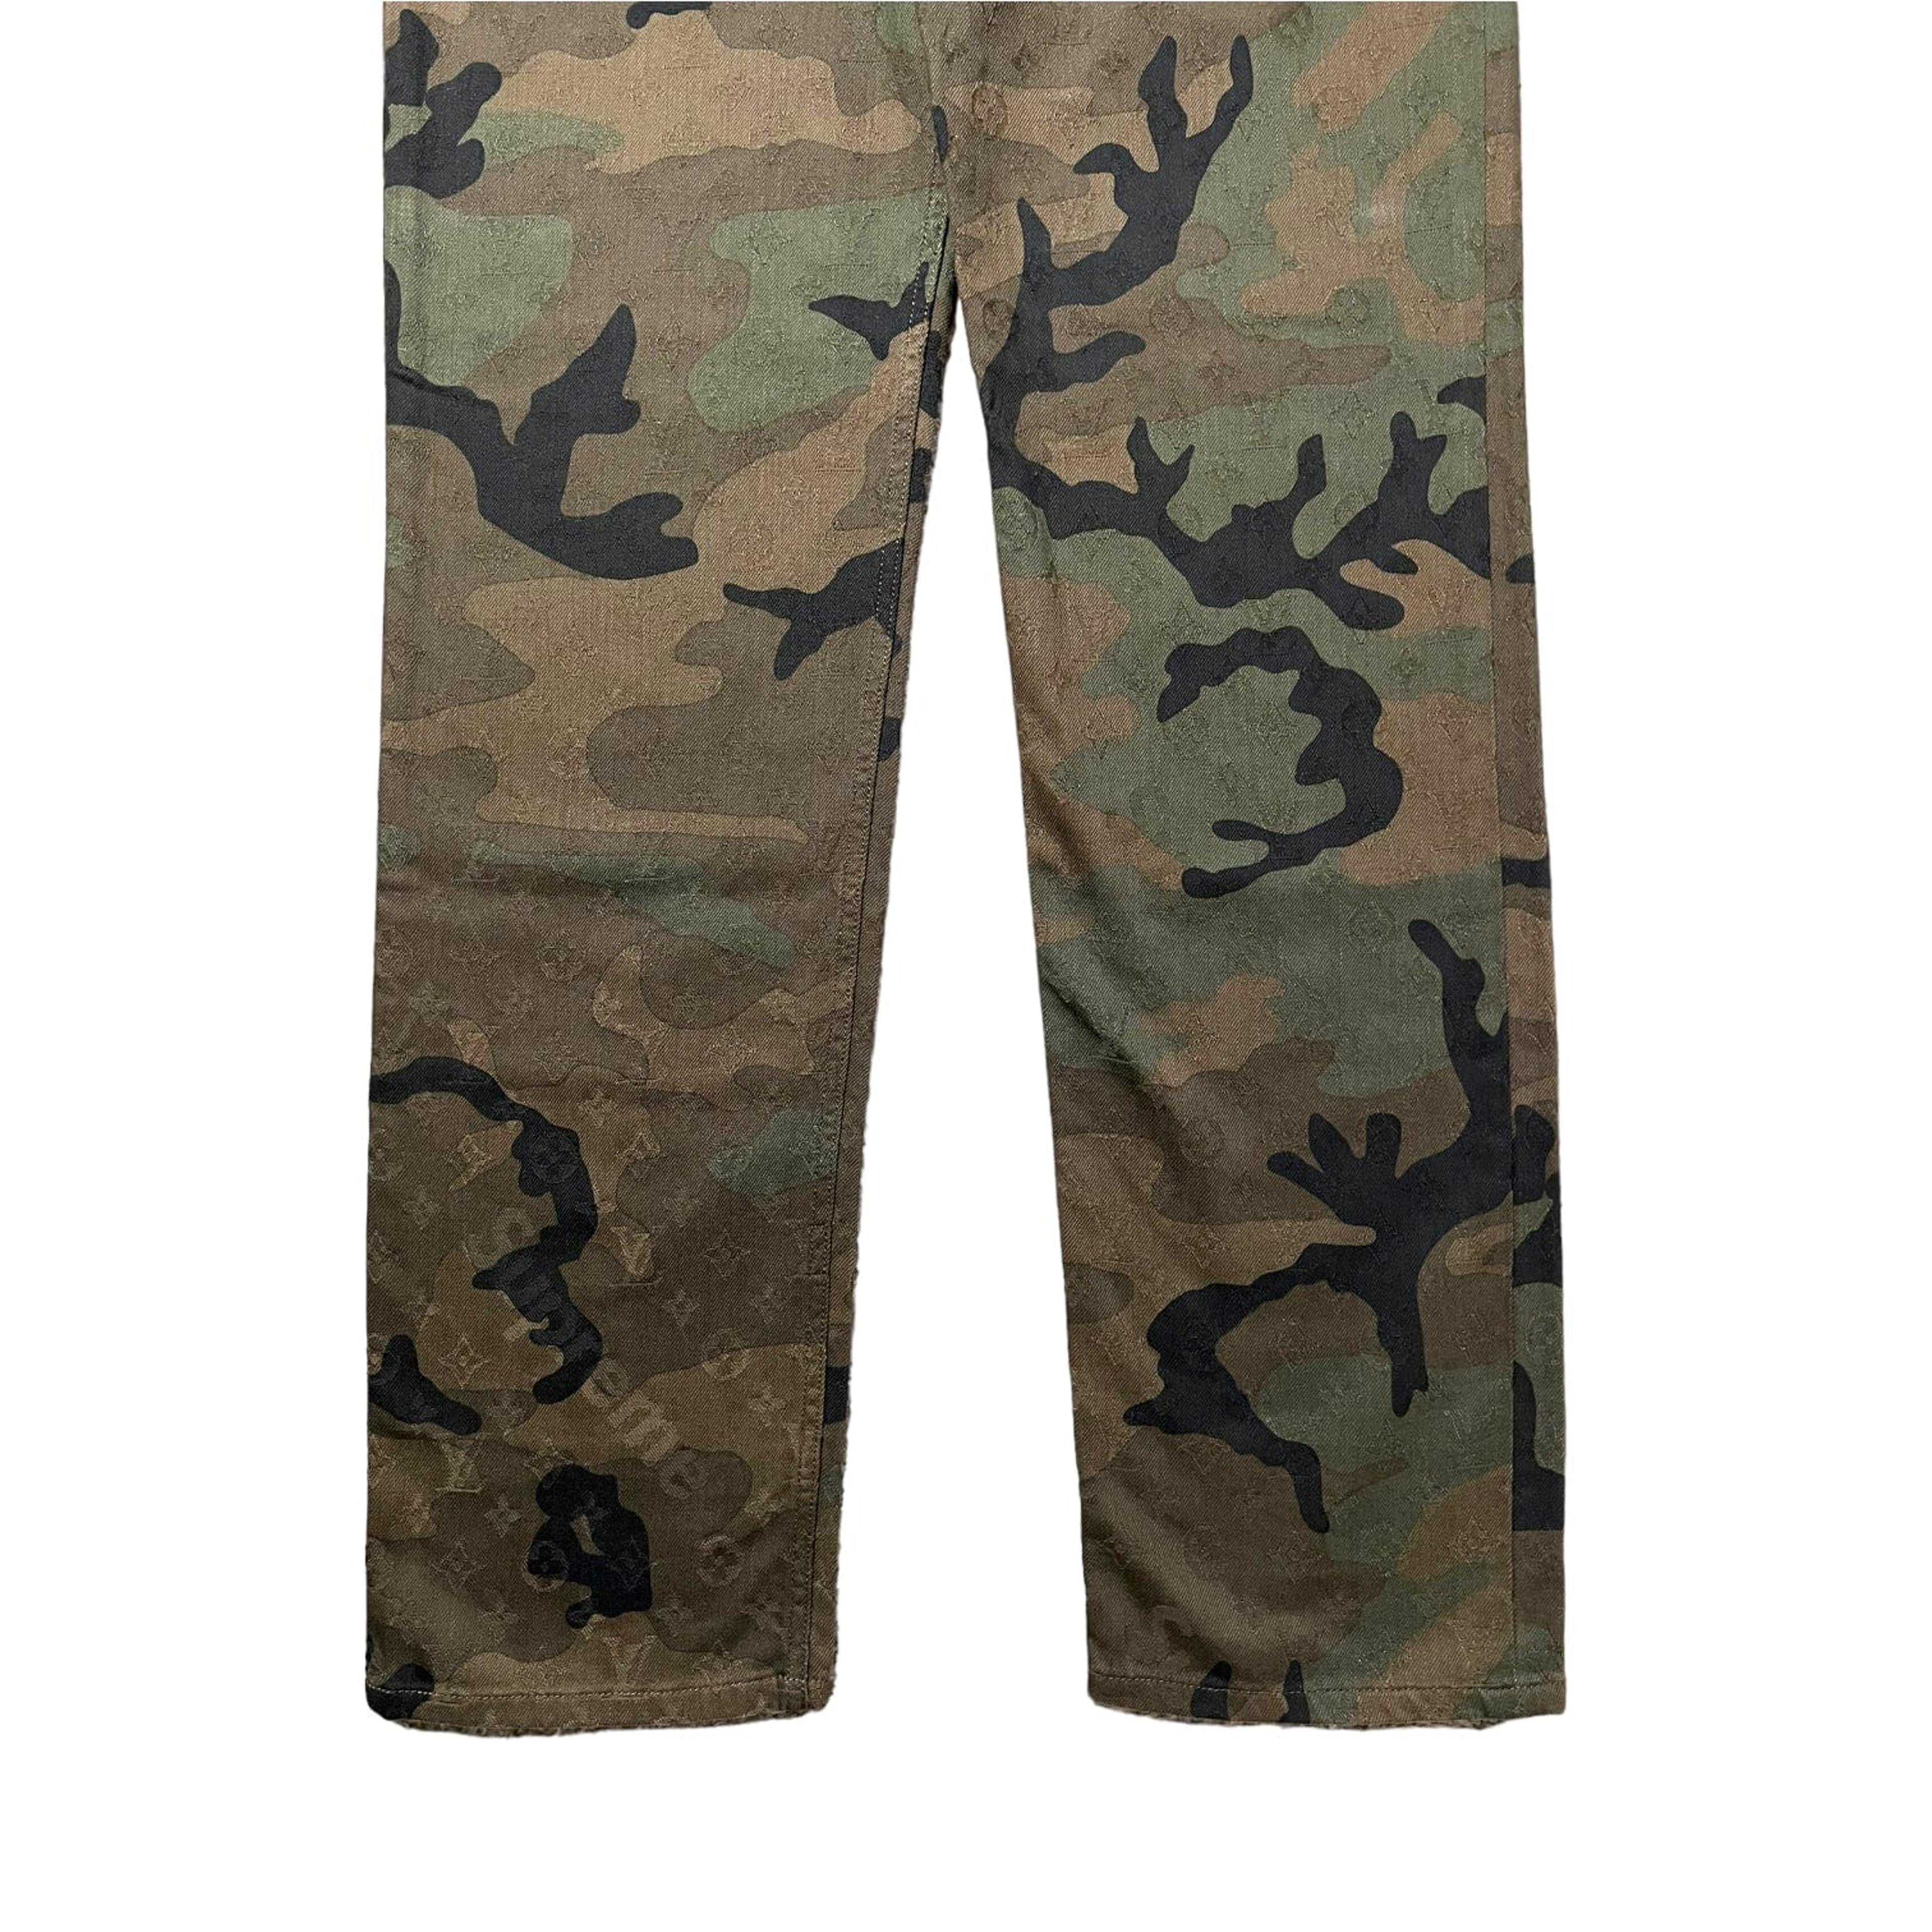 Alternate View 3 of Supreme x Louis Vuitton Jacquard Jeans Camouflage